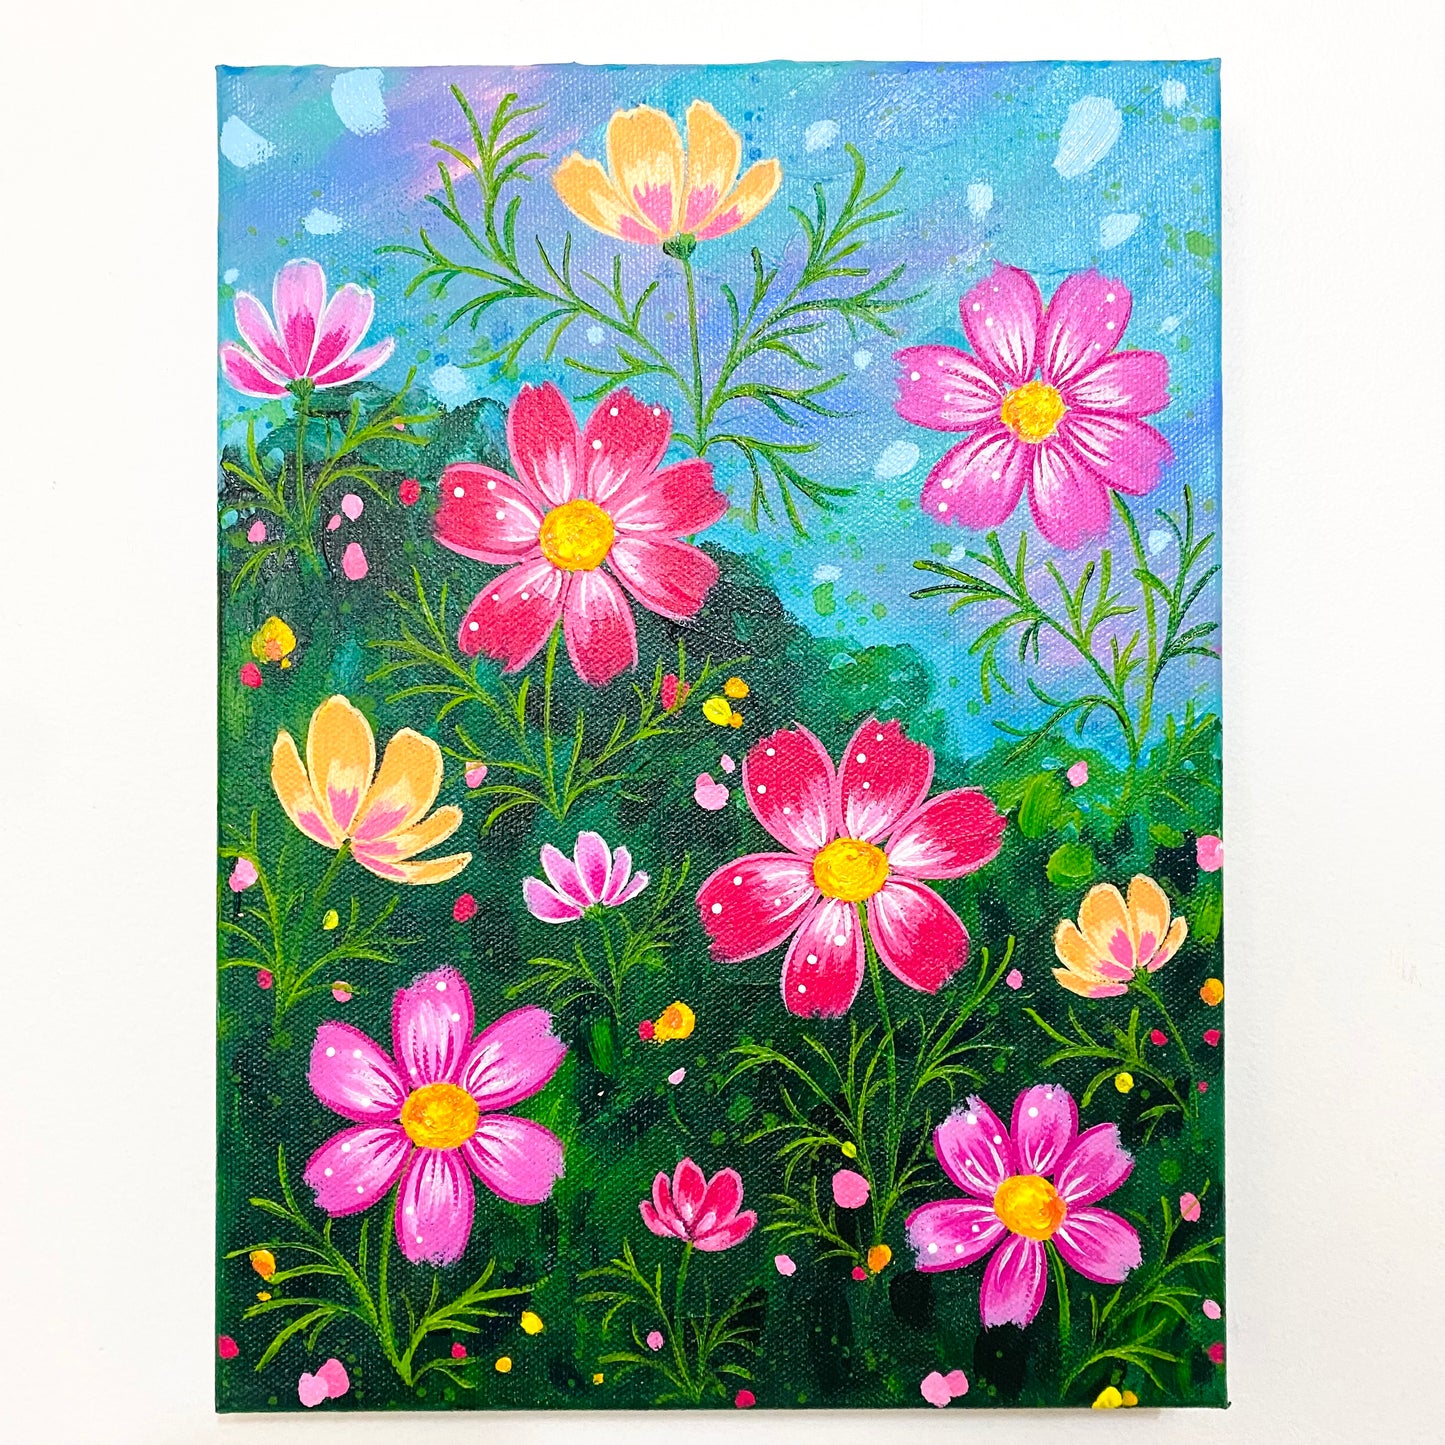 “Cosmo Fields” 9x12 inch original floral painting on canvas